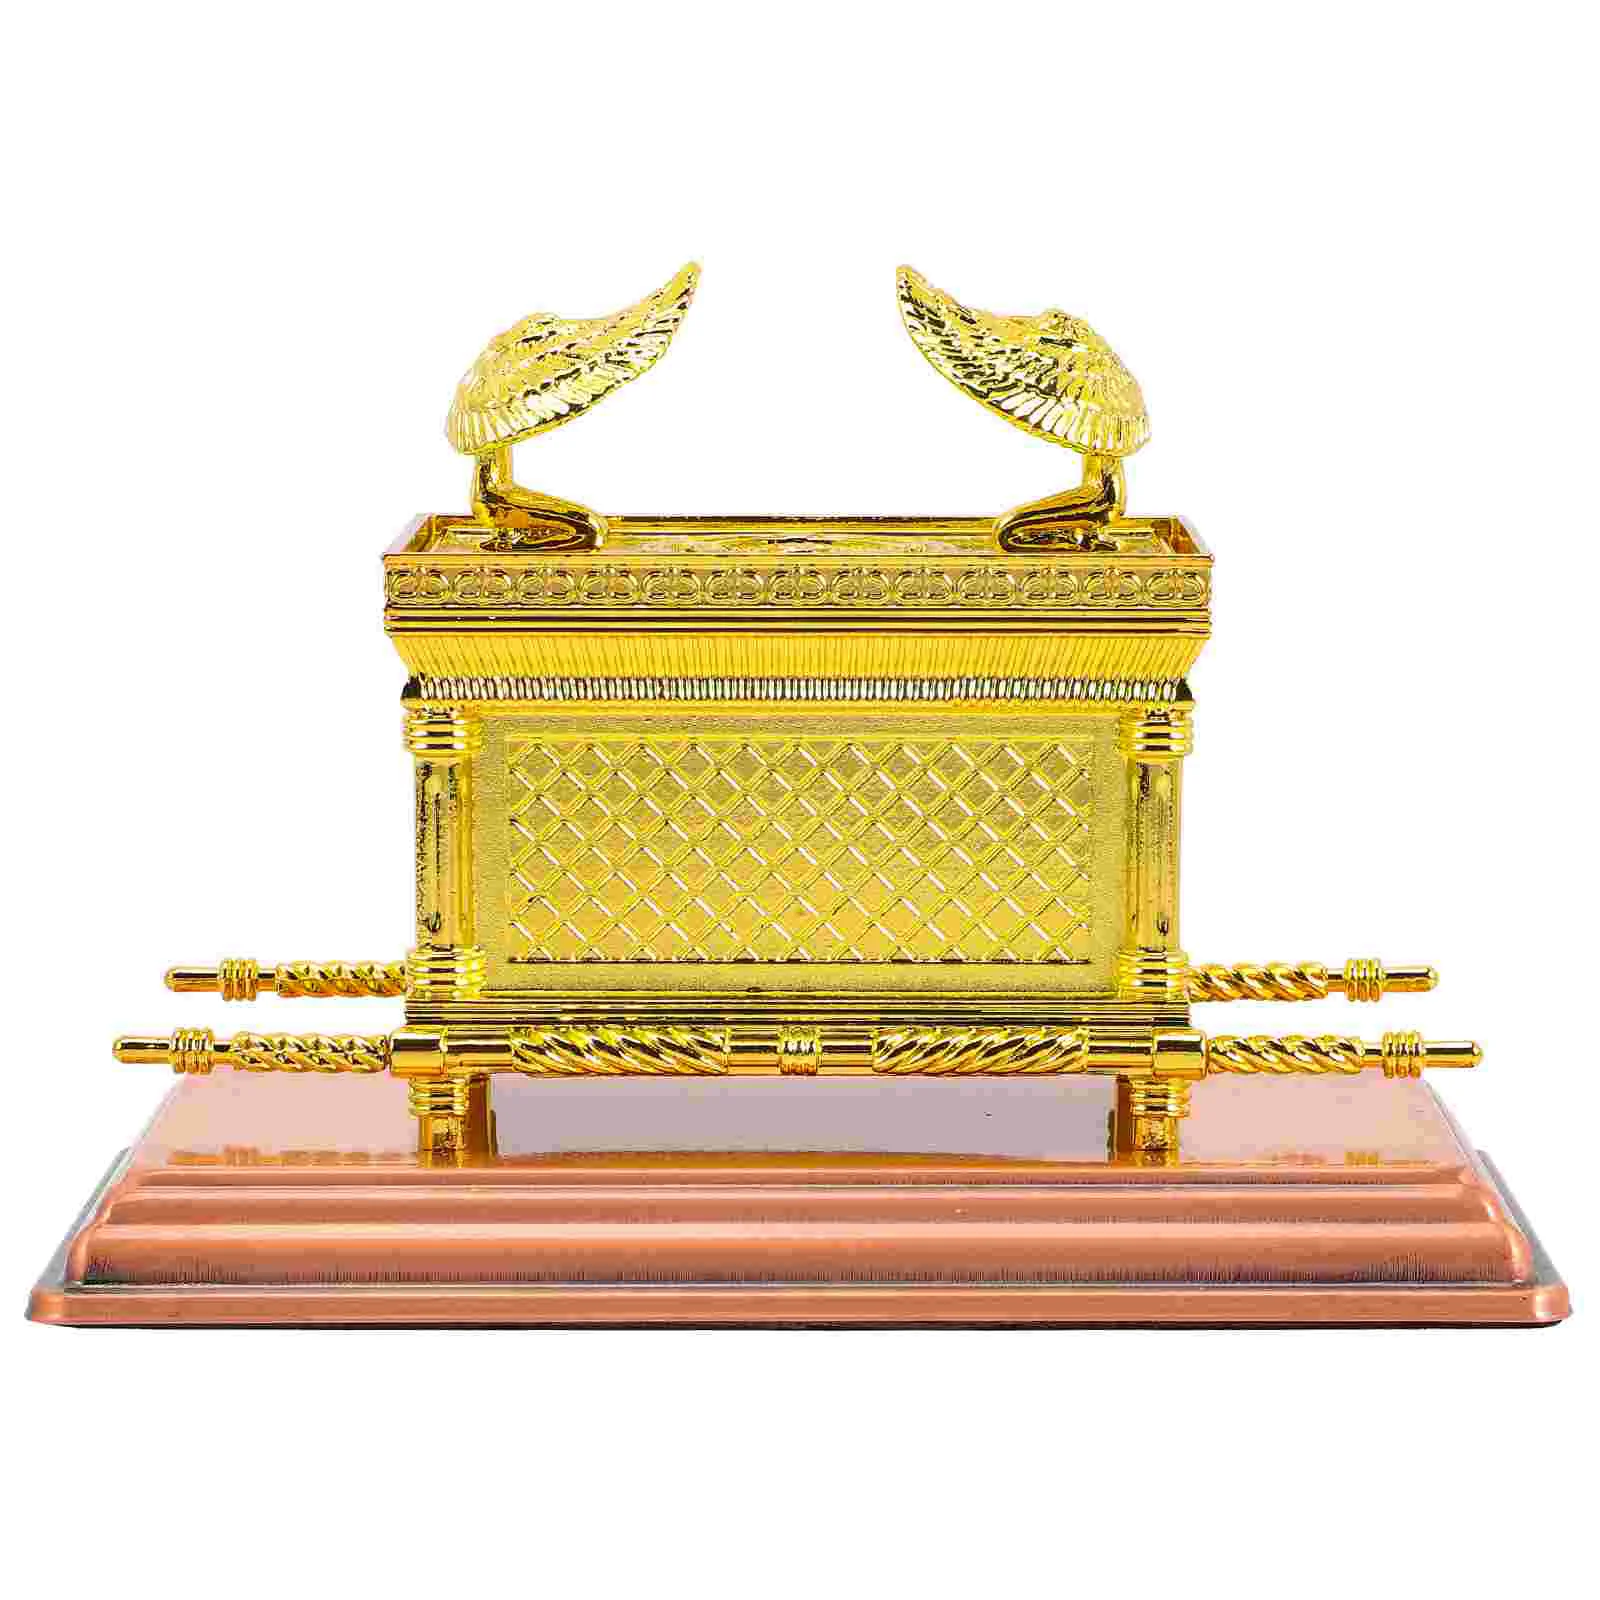 

Portable Premium Classical Exquisite The Ark Of The Covenant Model Religious Party Decoration for Home Decor Gift Option